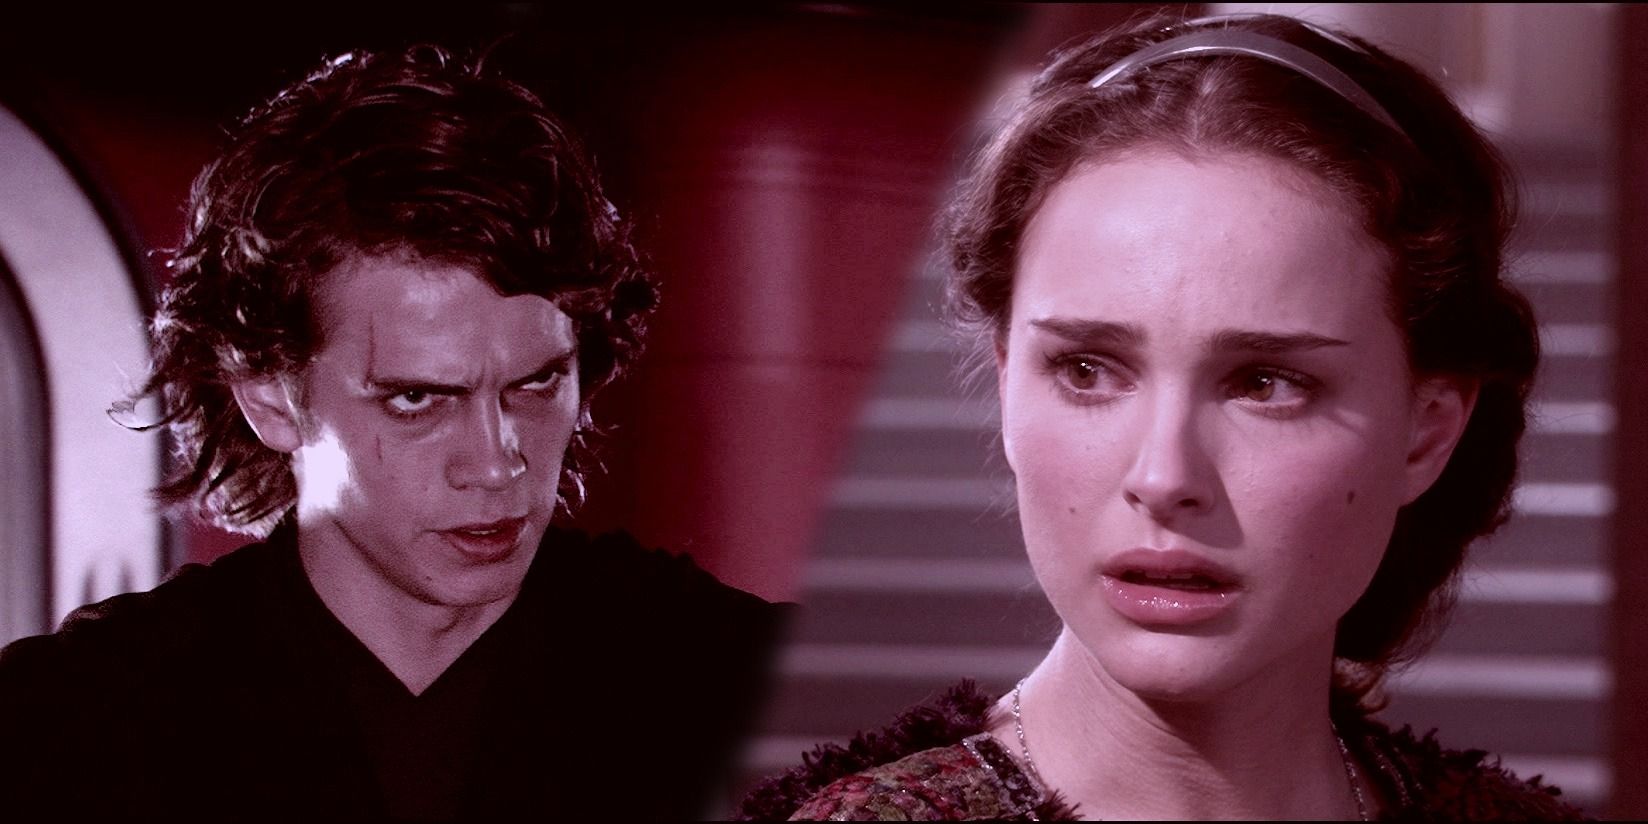 Anakin from Revenge of the Sith looking angry to the left and Padme from Revenge of the Sith looking upset to the right